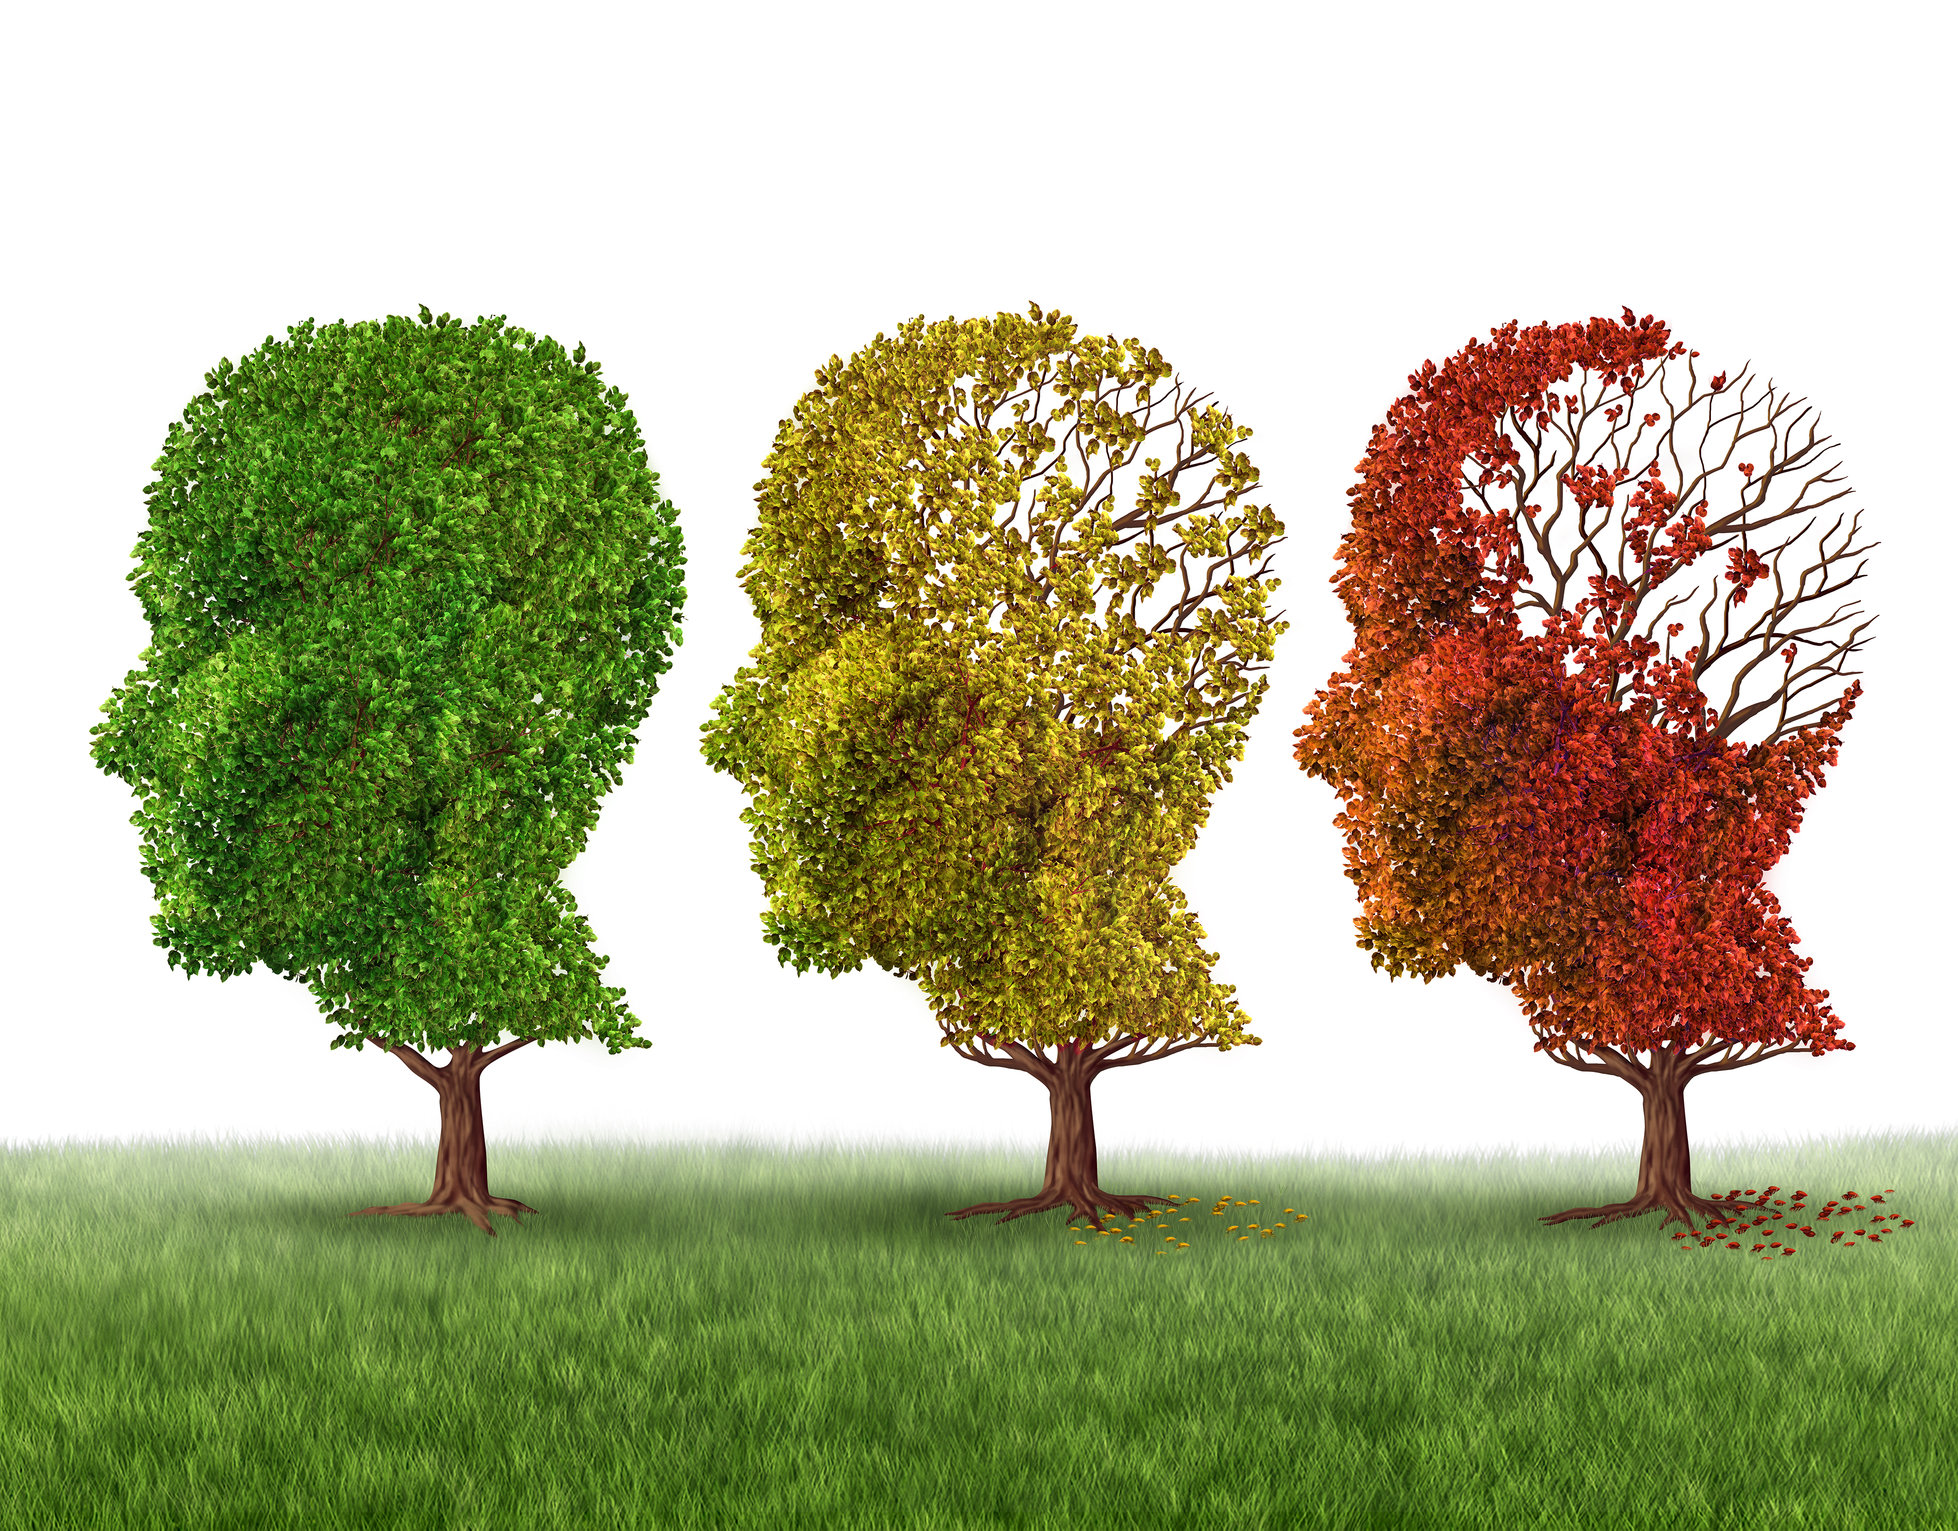 FDA Changes the Way Alzheimer’s Research is Approached